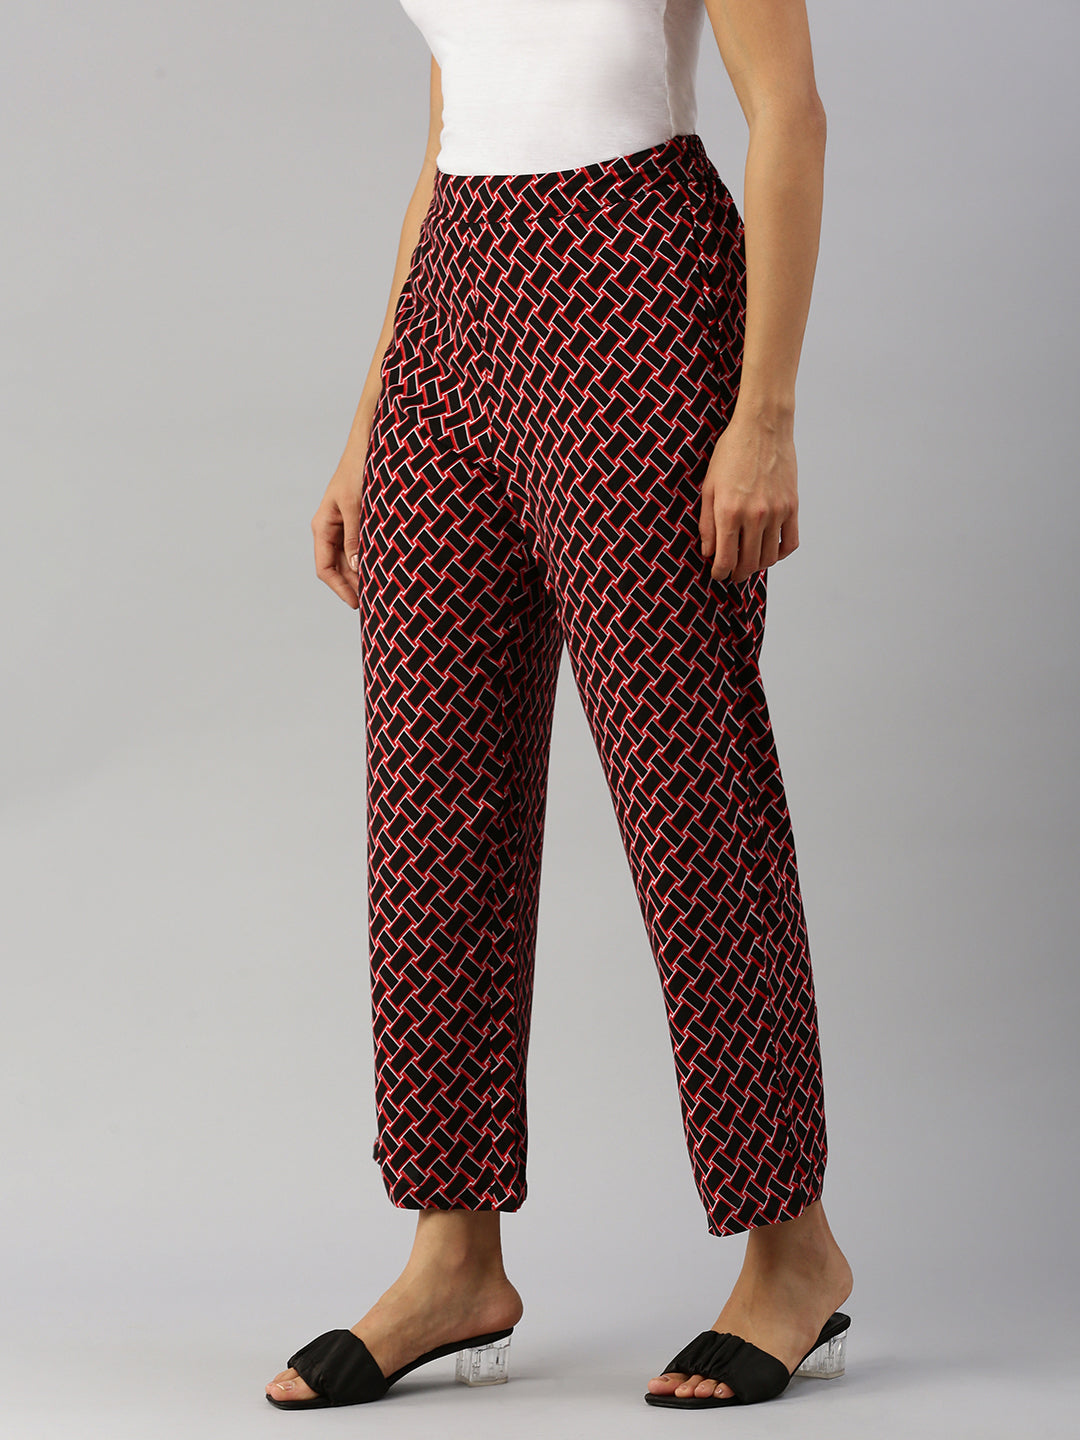 De Moza Women Printed Straight Pants in Black & Red